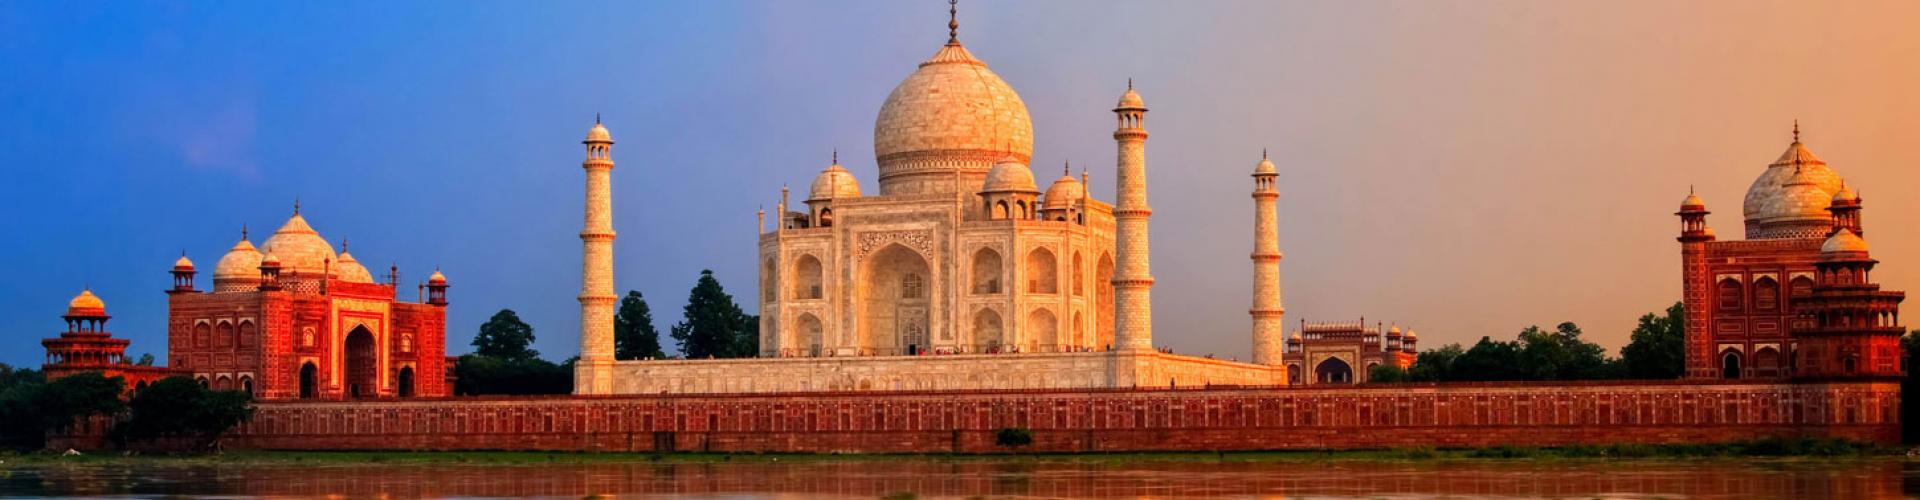 india tour packages from ottawa